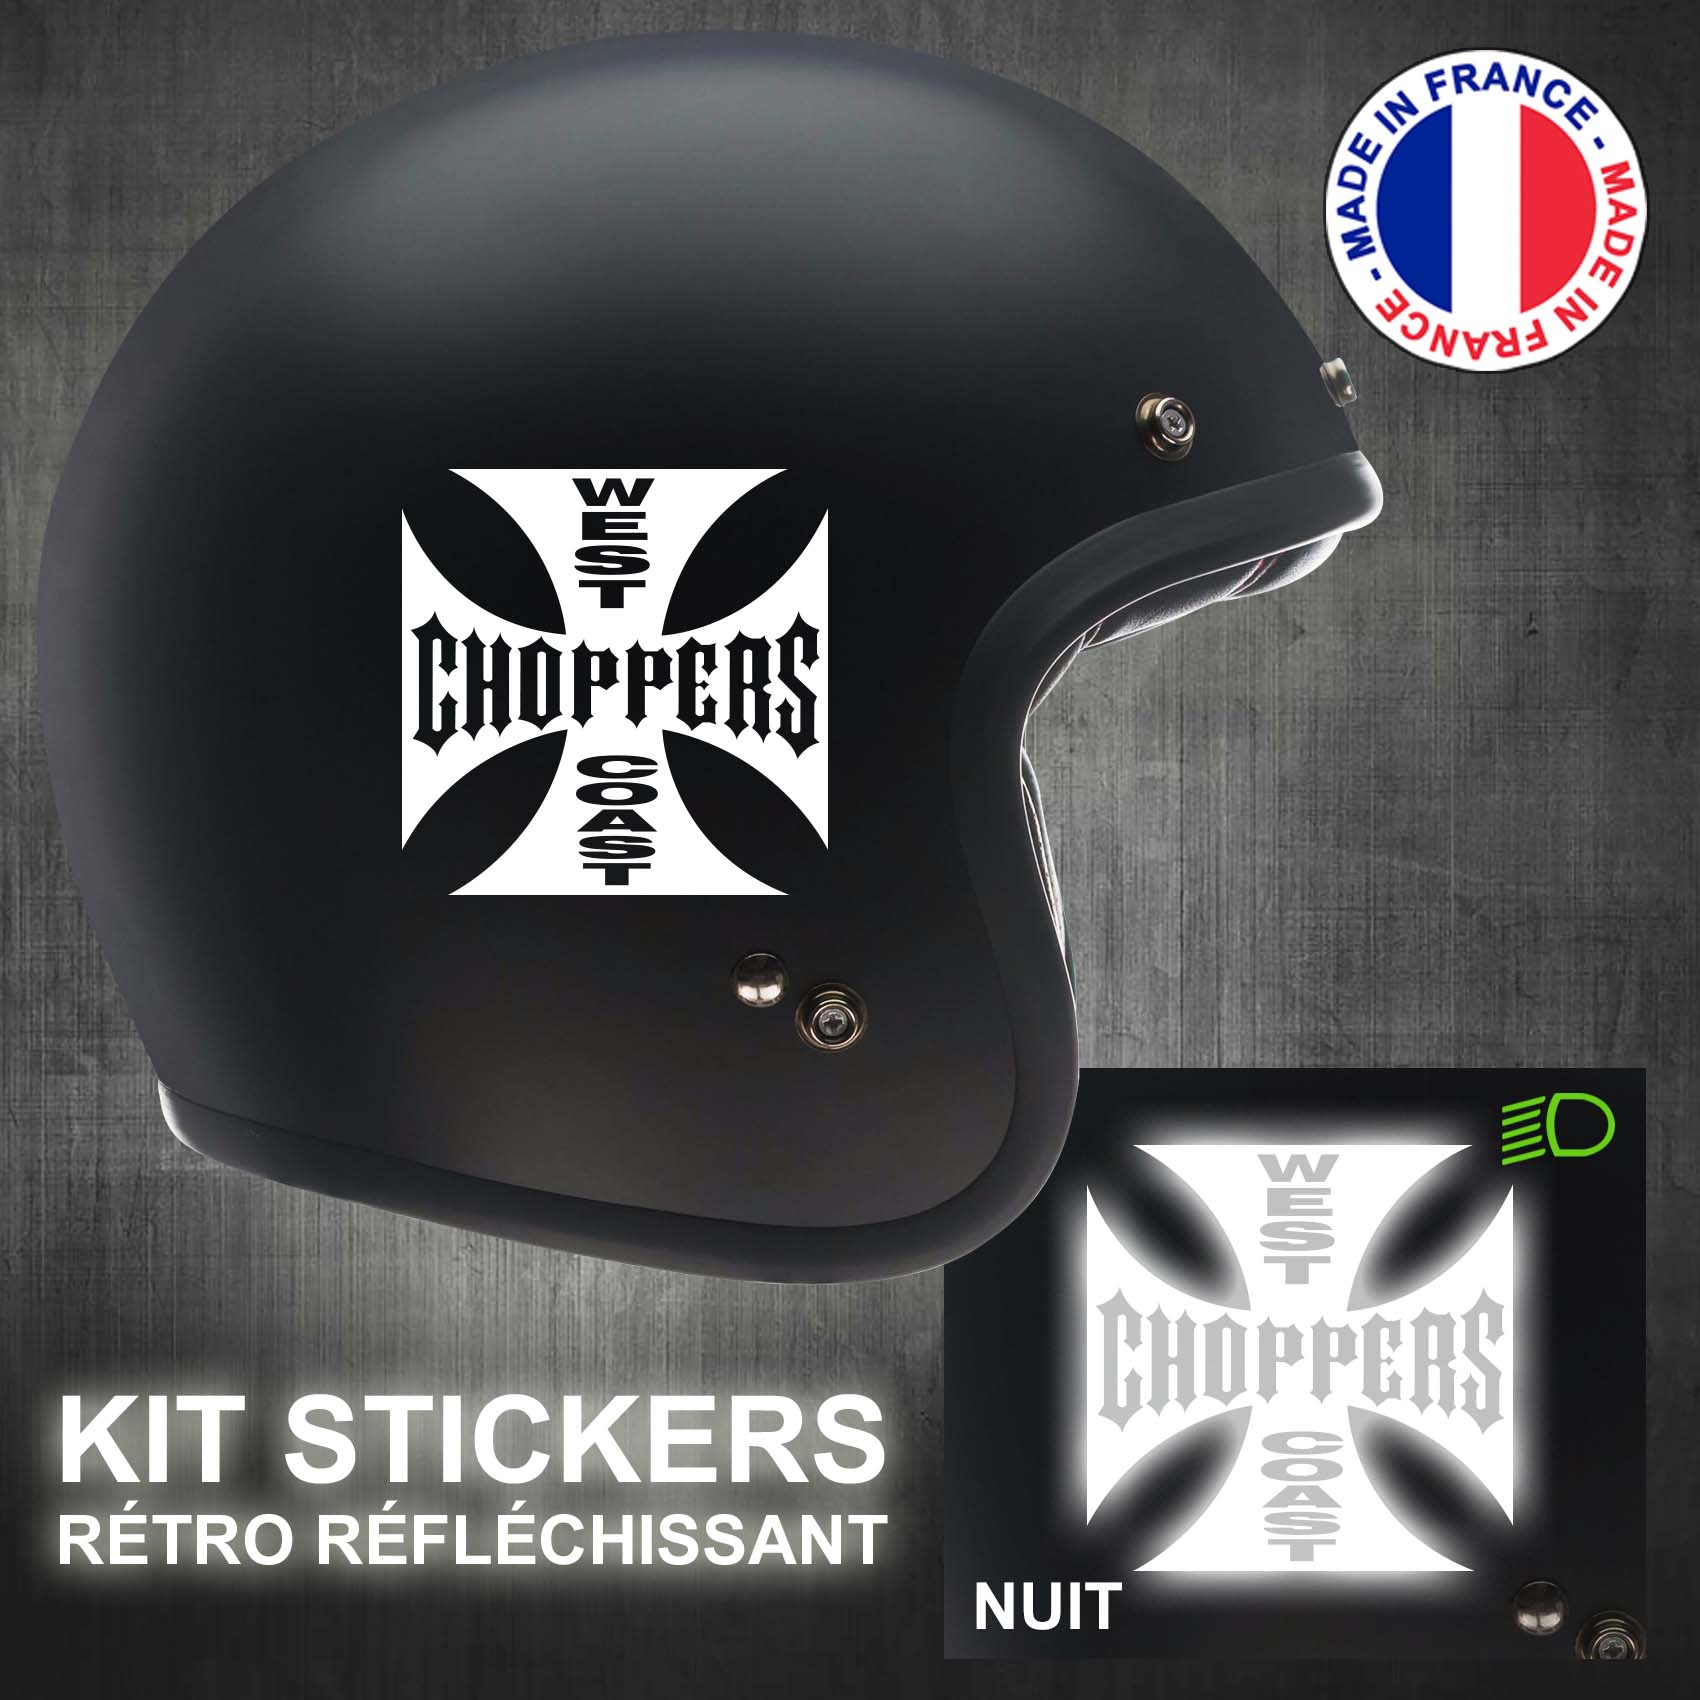 stickers-casque-moto-west-coast-choppers-ref1-retro-reflechissant-autocollant-noir-moto-velo-tuning-racing-route-sticker-casques-adhesif-scooter-nuit-securite-decals-personnalise-personnalisable-